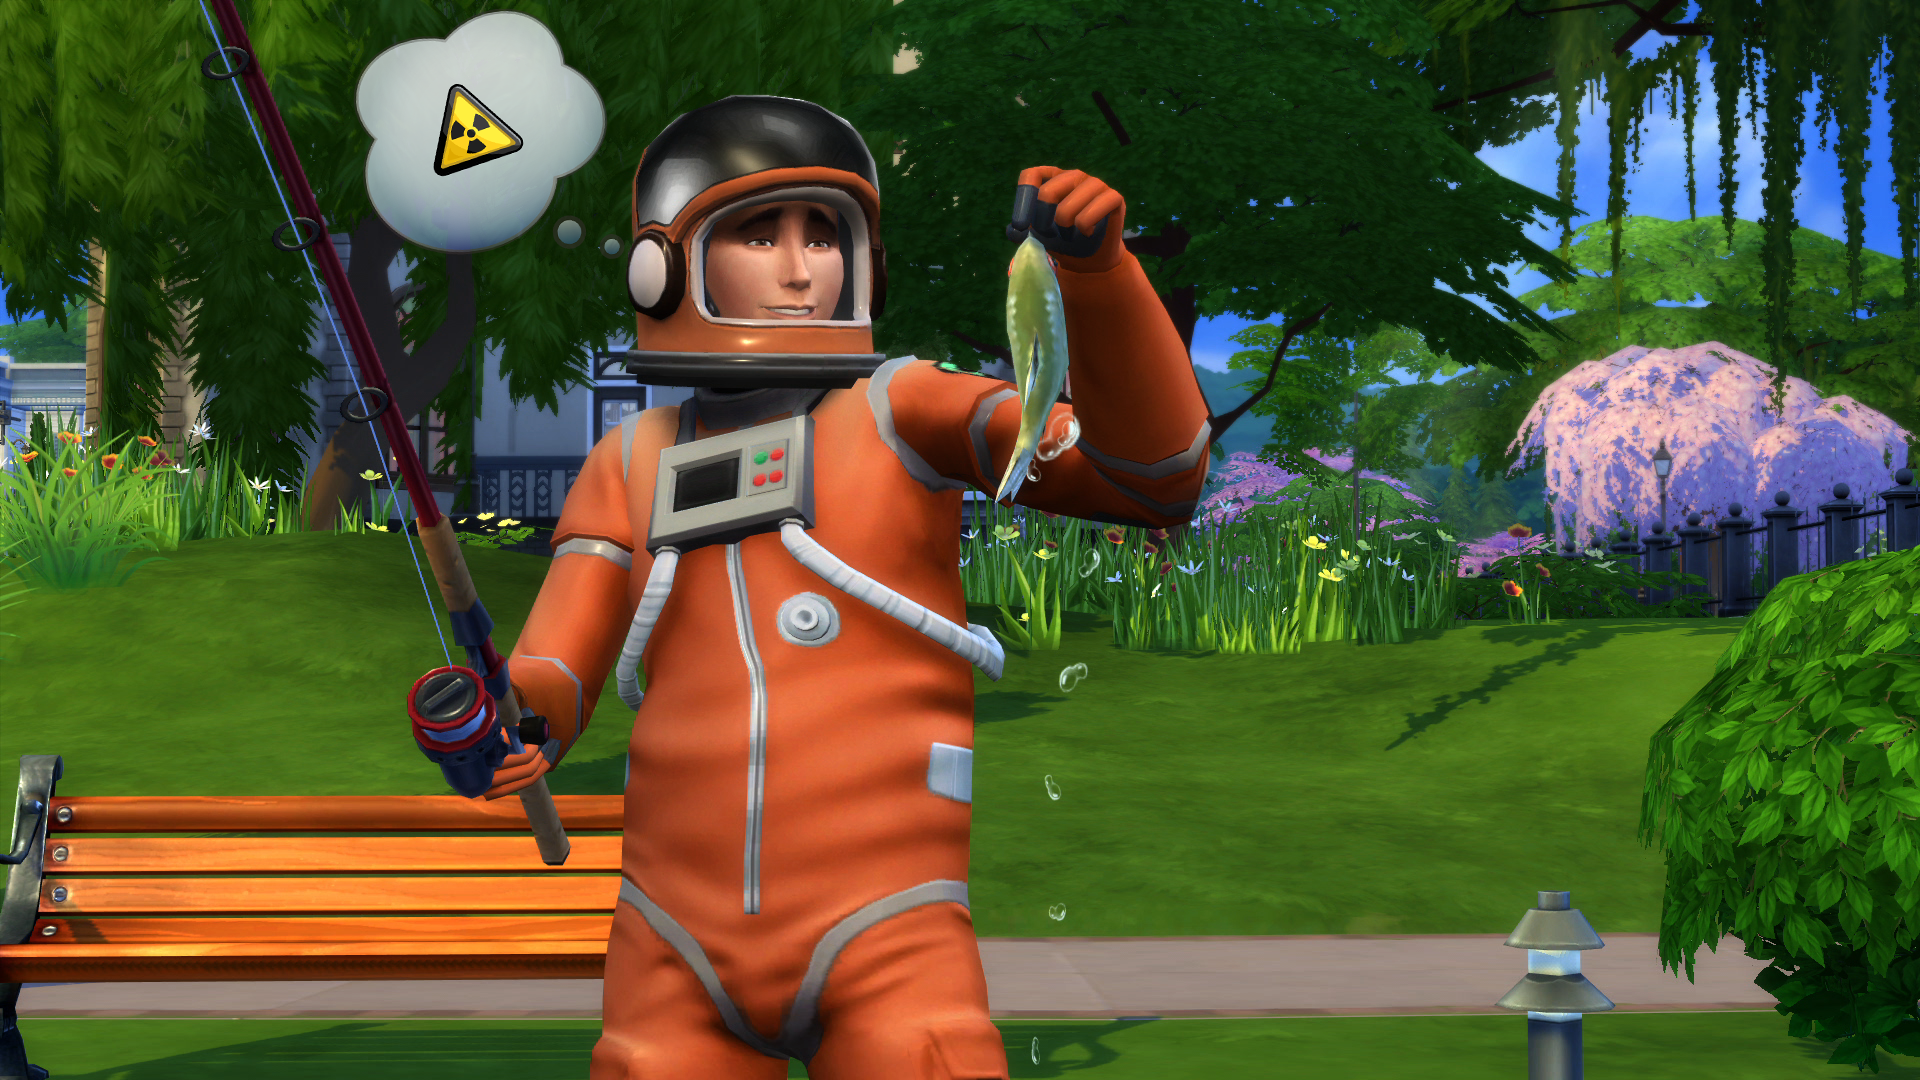 The Sims 4 Goes Free-To-Play: Things New Players Should Do First